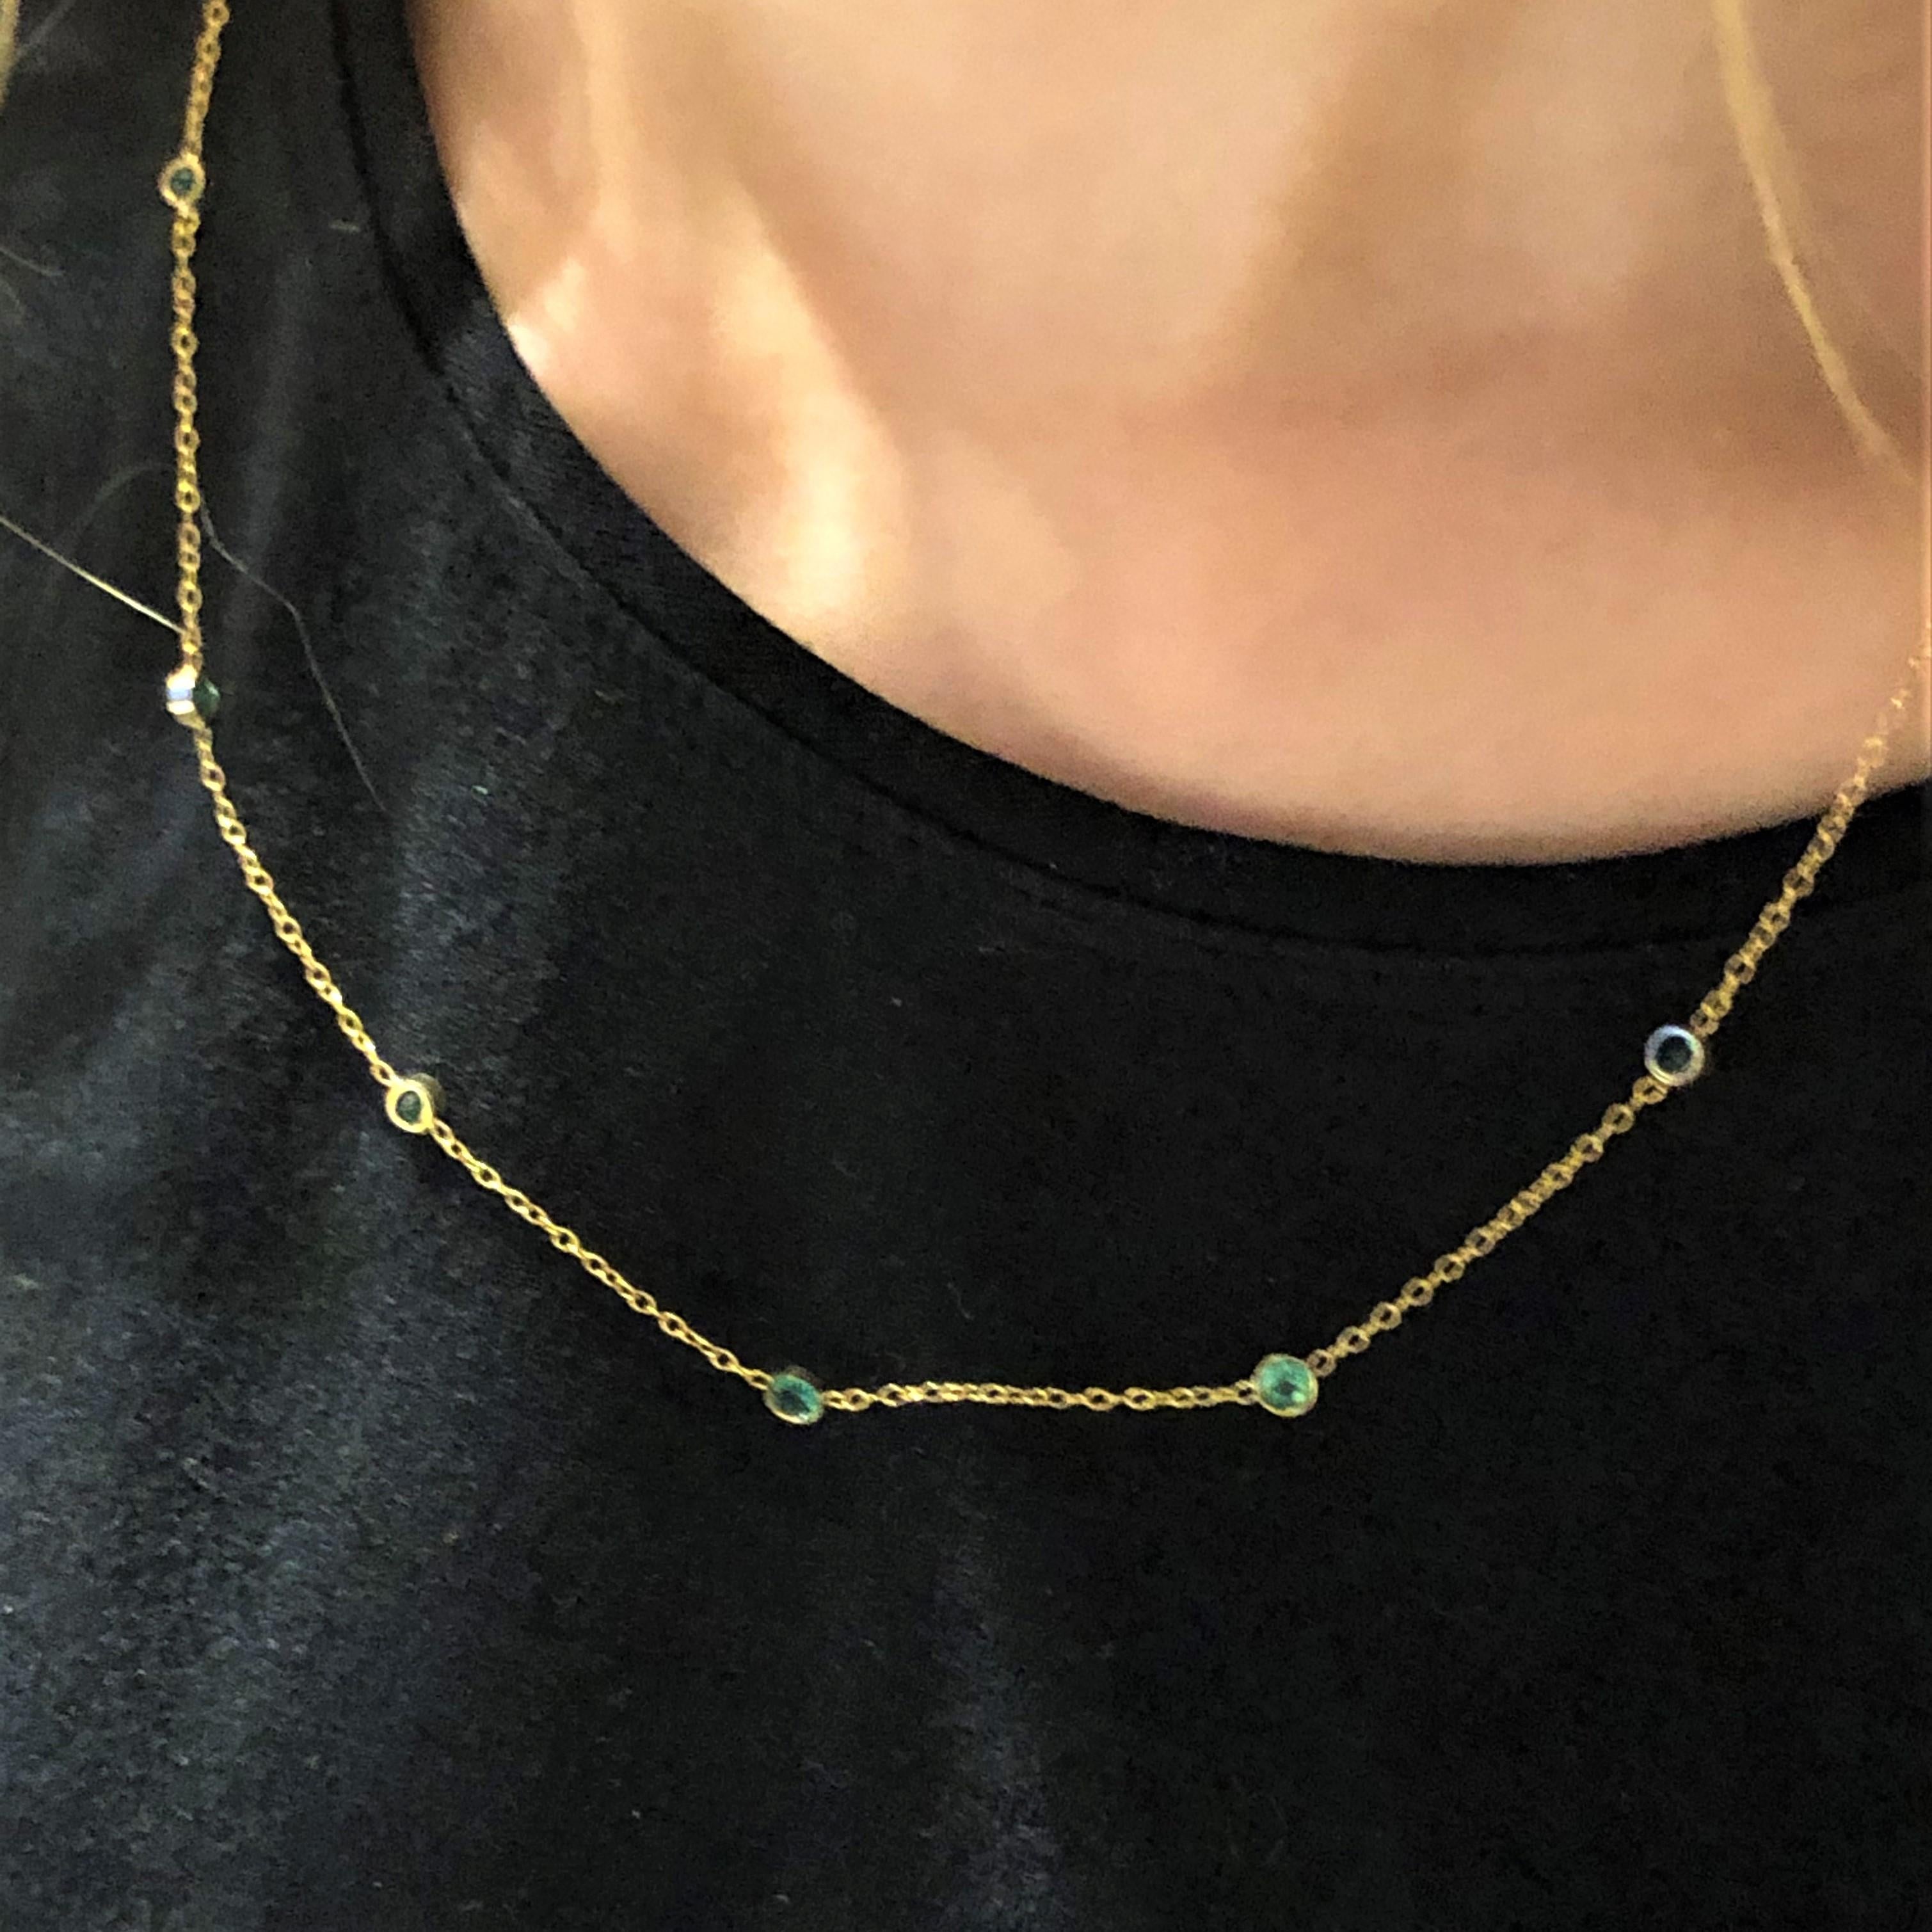 Contemporary Seven Bezel-Set Emerald in Yellow Gold Necklace Weighing 1.15 Carat